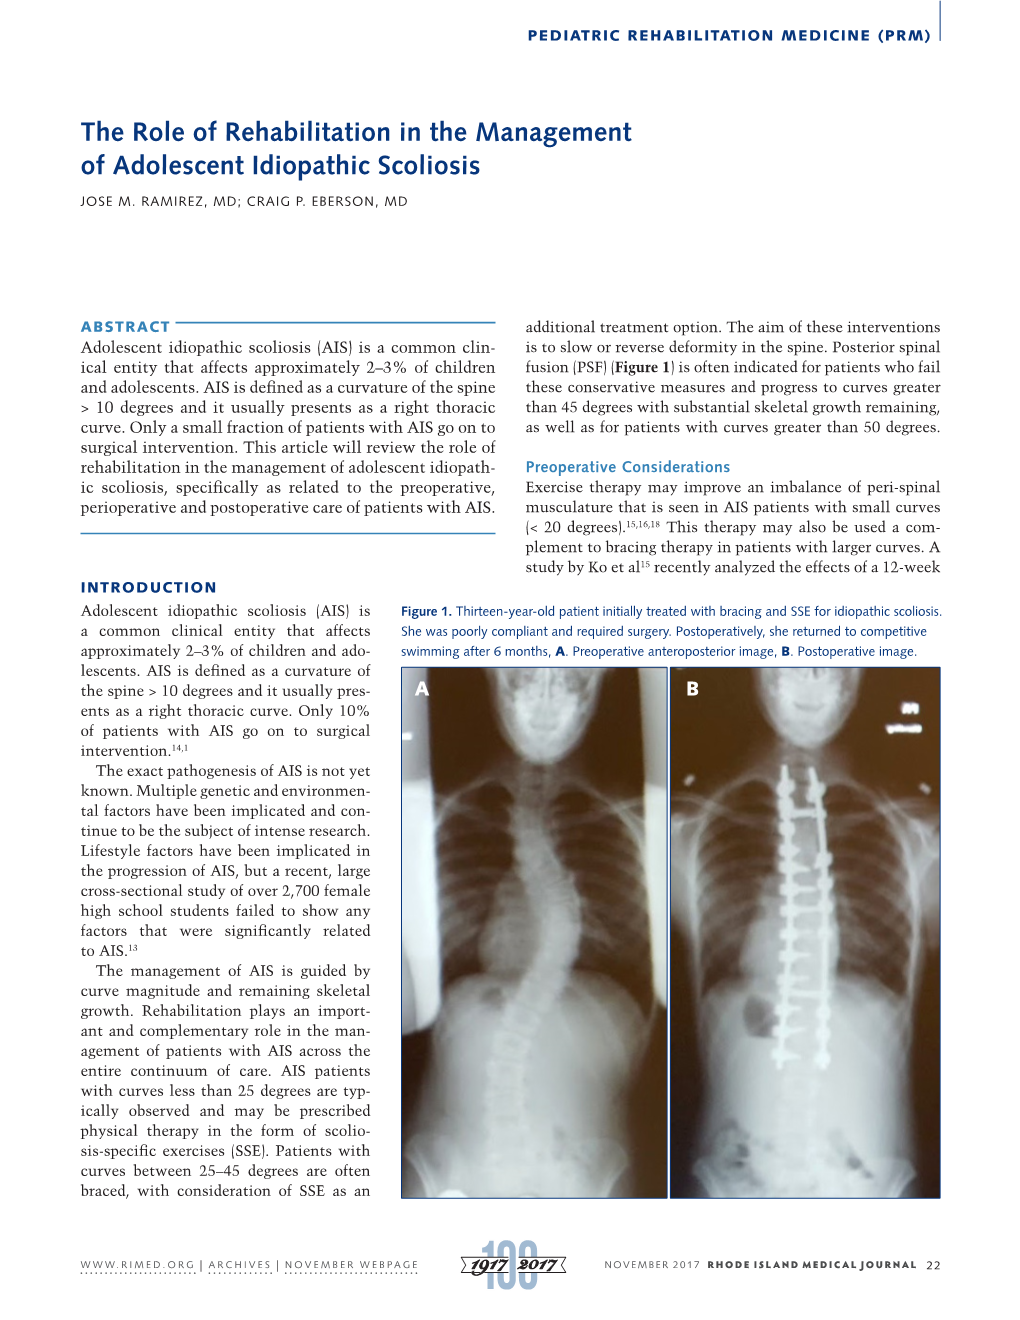 The Role of Rehabilitation in the Management of Adolescent Idiopathic Scoliosis